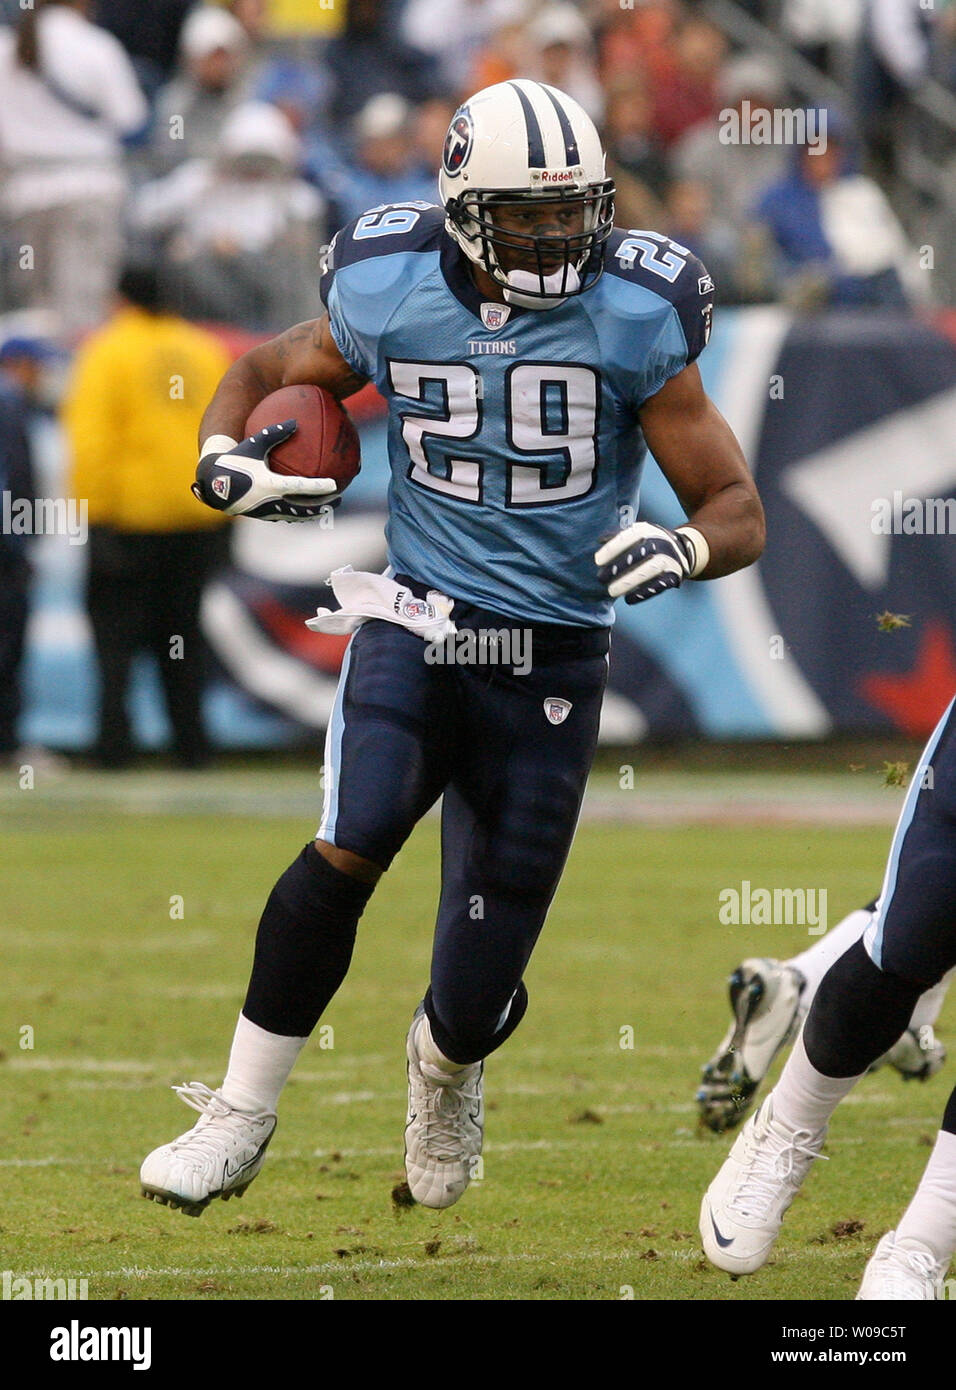 Tennessee Titans runningback Chris Brown (29) rushes against the